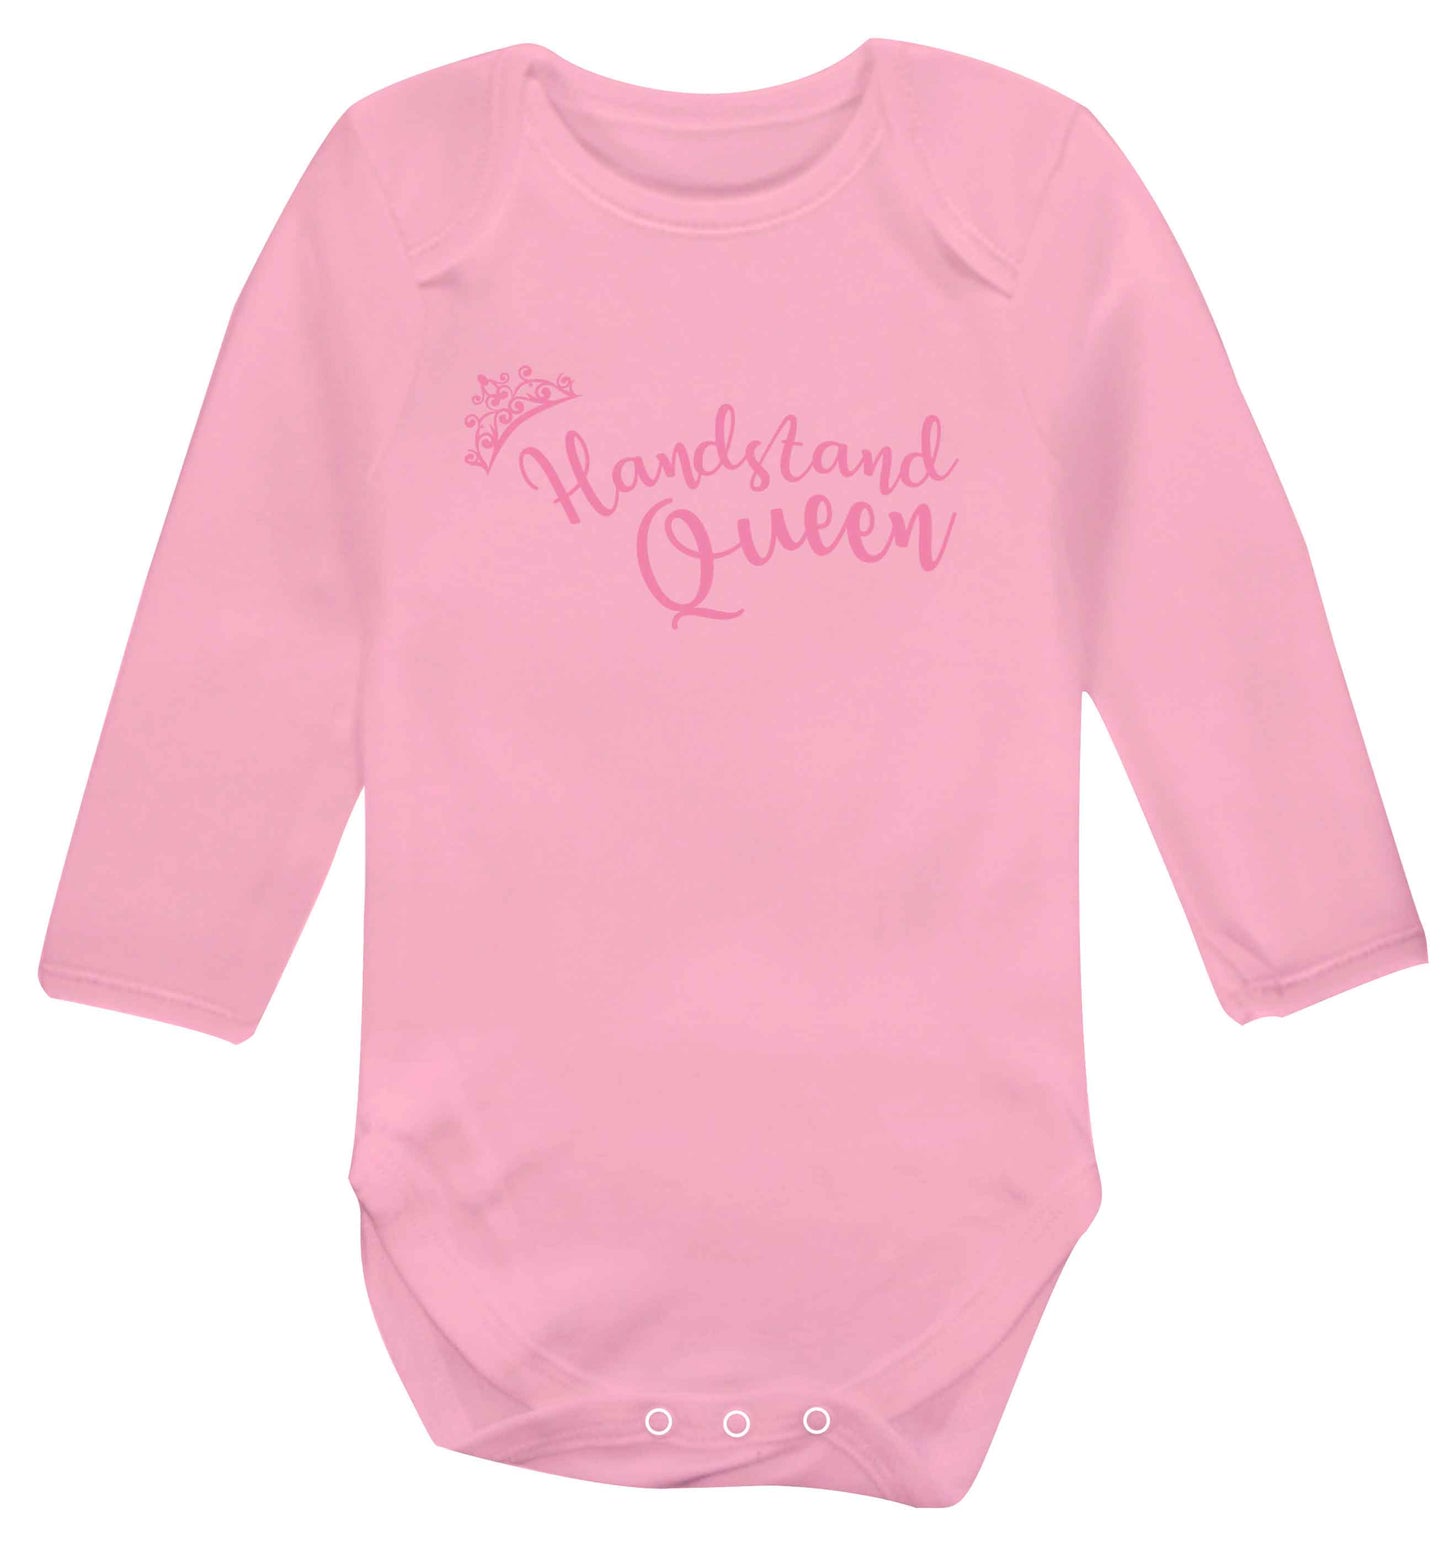 Handstand Queen Baby Vest long sleeved pale pink 6-12 months